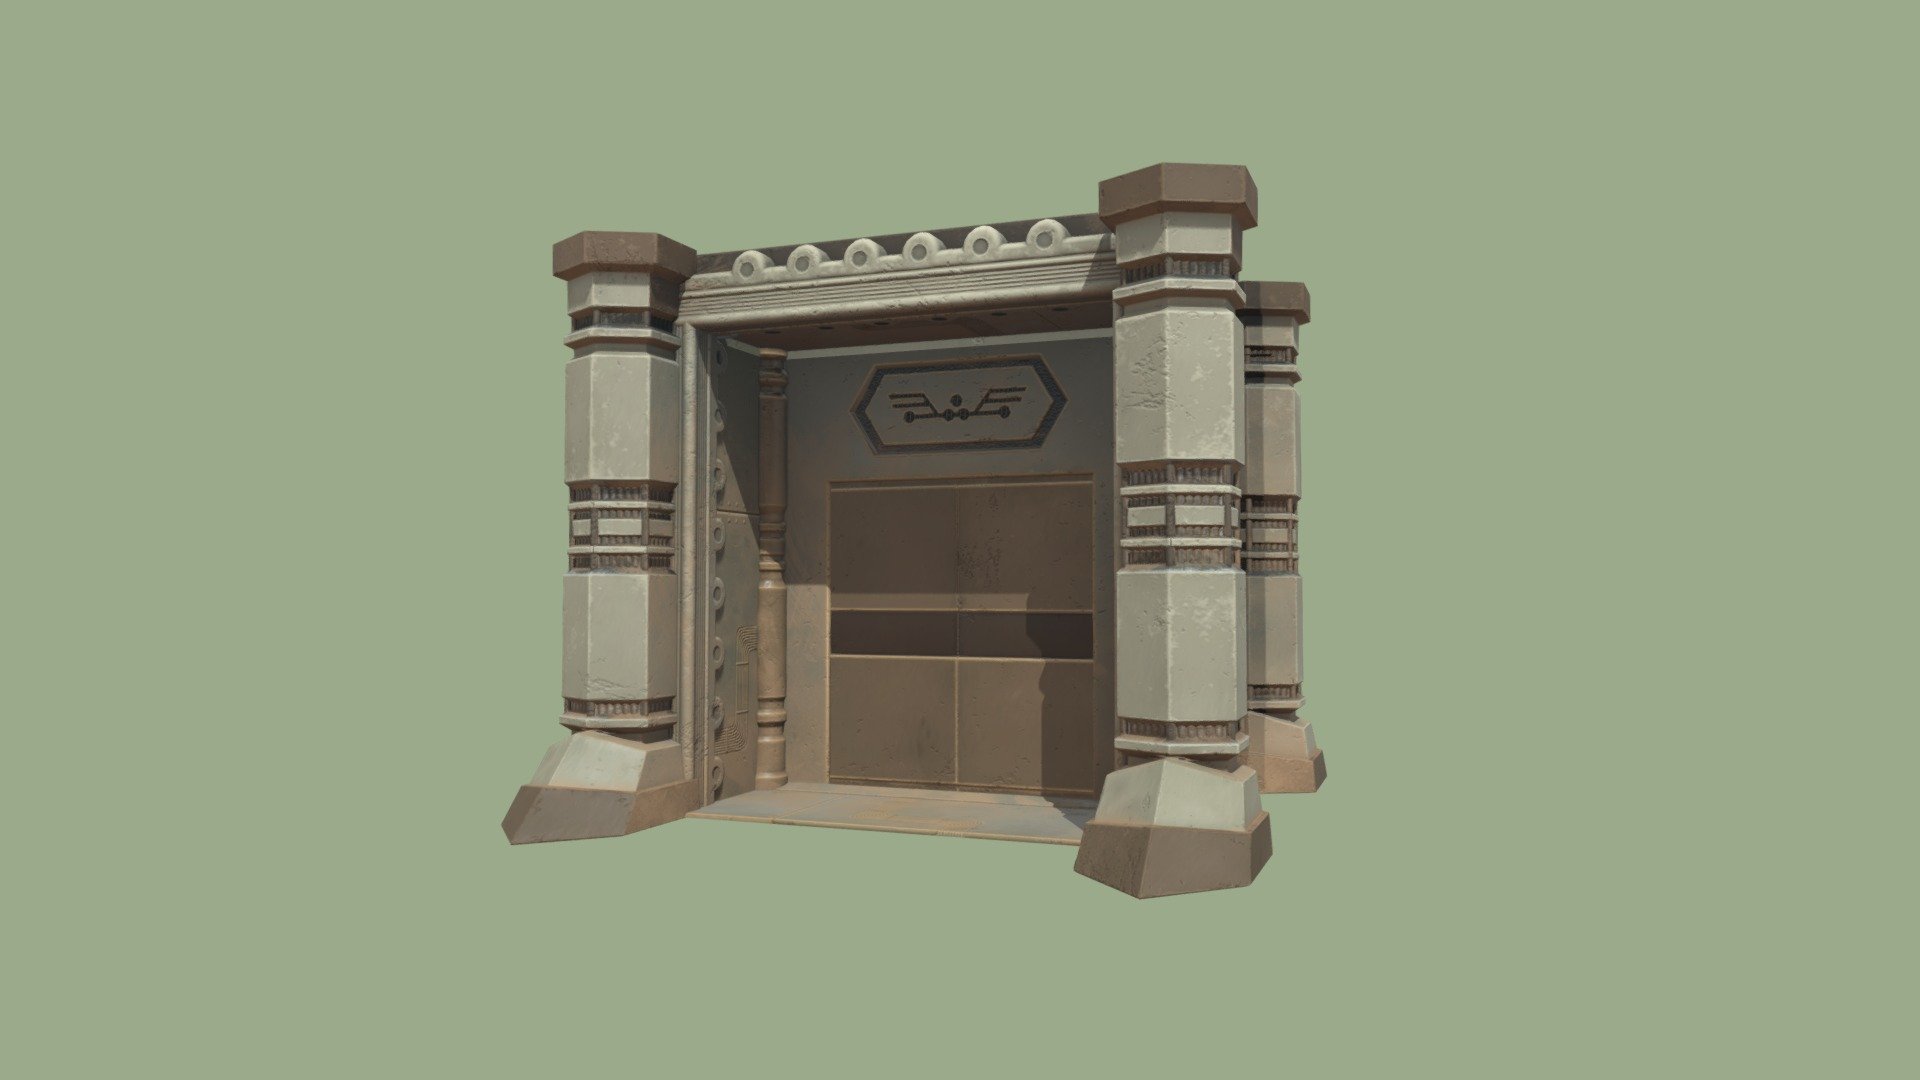 This is an MMLX environment asset designed to work within the dungeon ruins of the Mega Man Legends universe. This asset was tricky in that there wasn't much in the way of a concept for the generic ruins door. So this version of the door elaborates on or embellishes the original design visible in the game. 

The asset provided here is the high res game asset. That includes the textures. Feel free to download and use for your projects. Please credit PSYCHOPOMP and/or JJ Chalupnik for the modeling/texturing if you decide to use it.

Learn more about the fan project here: https://psychopomp-studios.com/mmlx/ - Generic Ruins Door - Download Free 3D model by TUGBOAT GAMES (@TugboatGames) 3d model